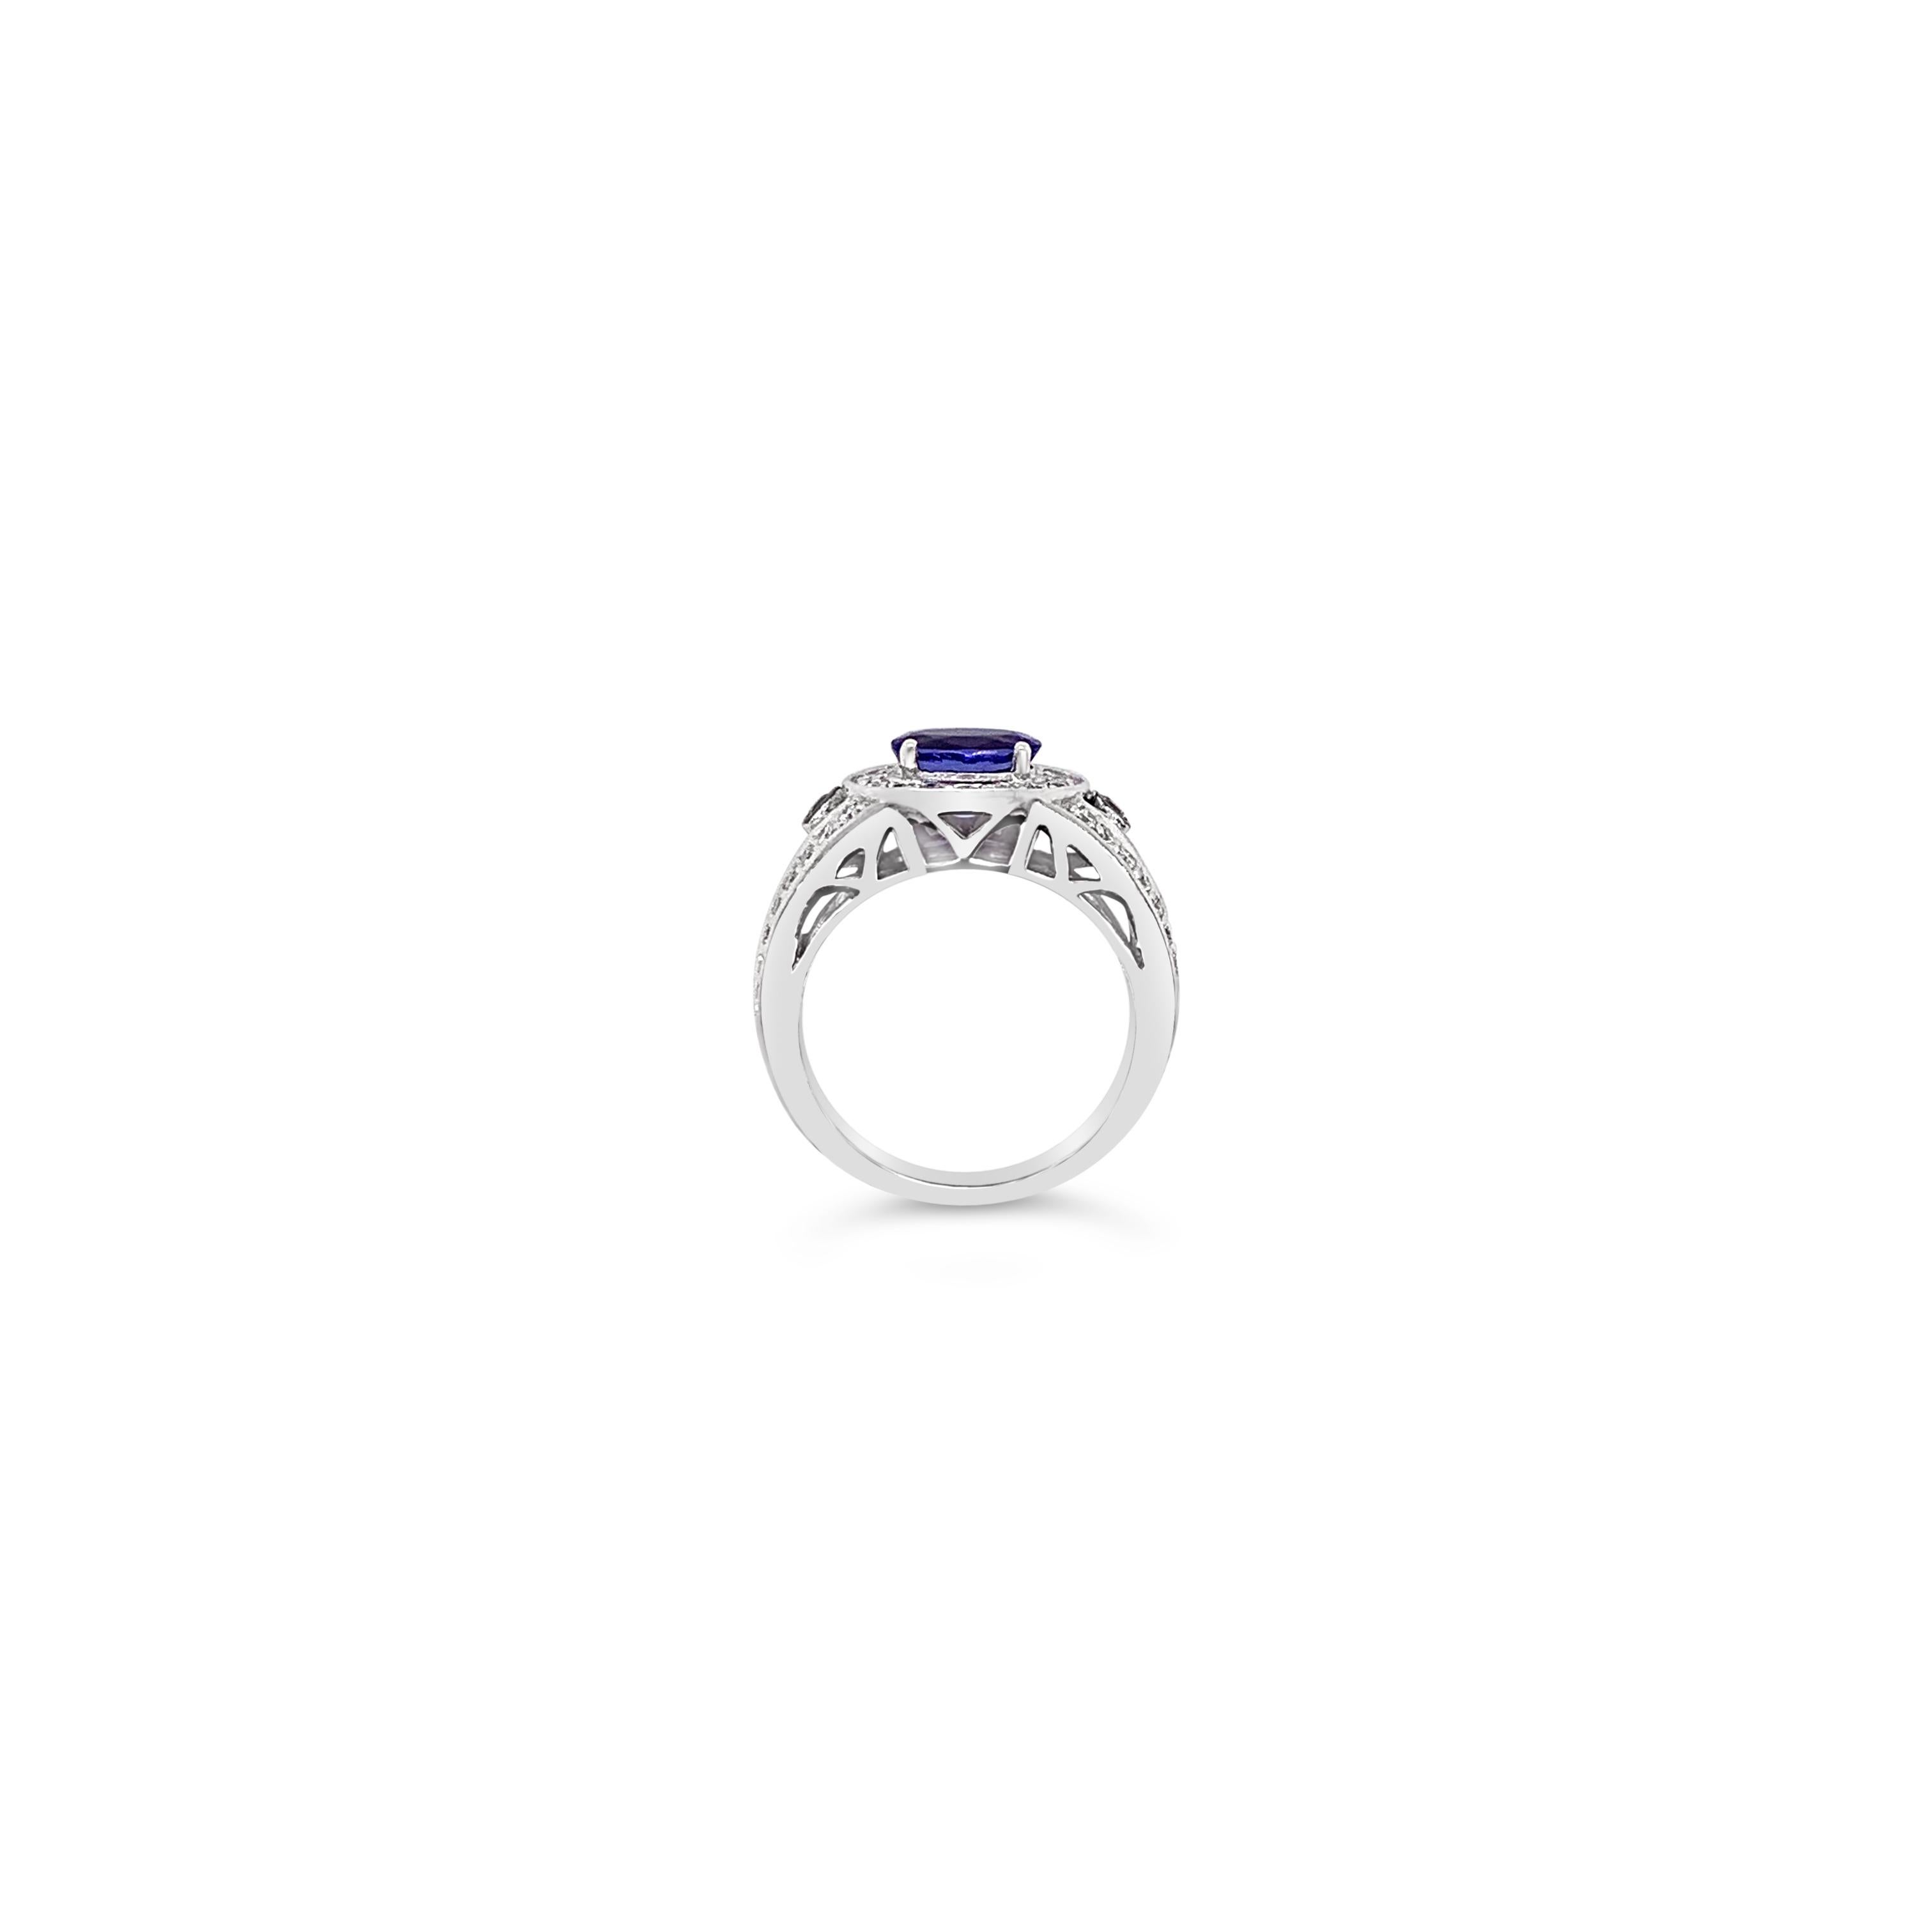 Le Vian Chocolatier® Ring featuring 0.65 cts. Blueberry Tanzanite®, 0.04 cts. Chocolate Diamonds® , 0.42 cts. Vanilla Diamonds®  set in 14K Vanilla Gold®
Ring size 7
Please feel free to reach out with any questions! Item comes with a Le Vian®